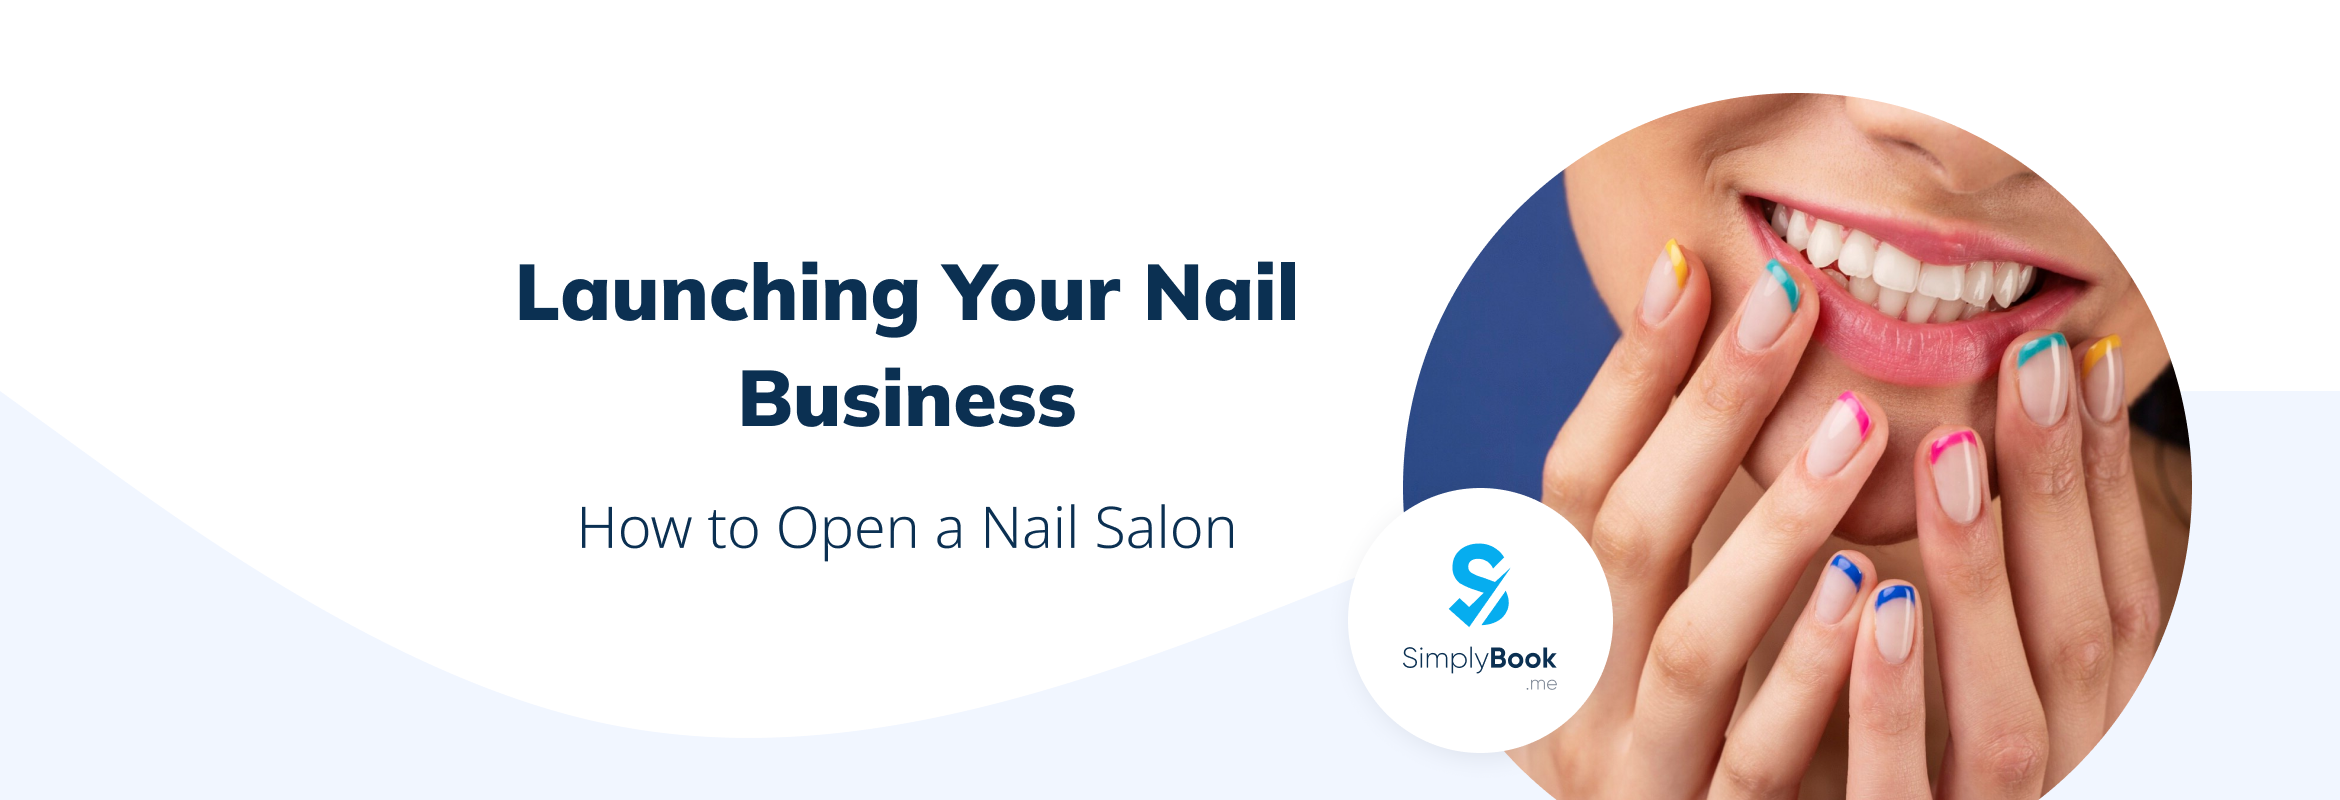 Open a Nail Business